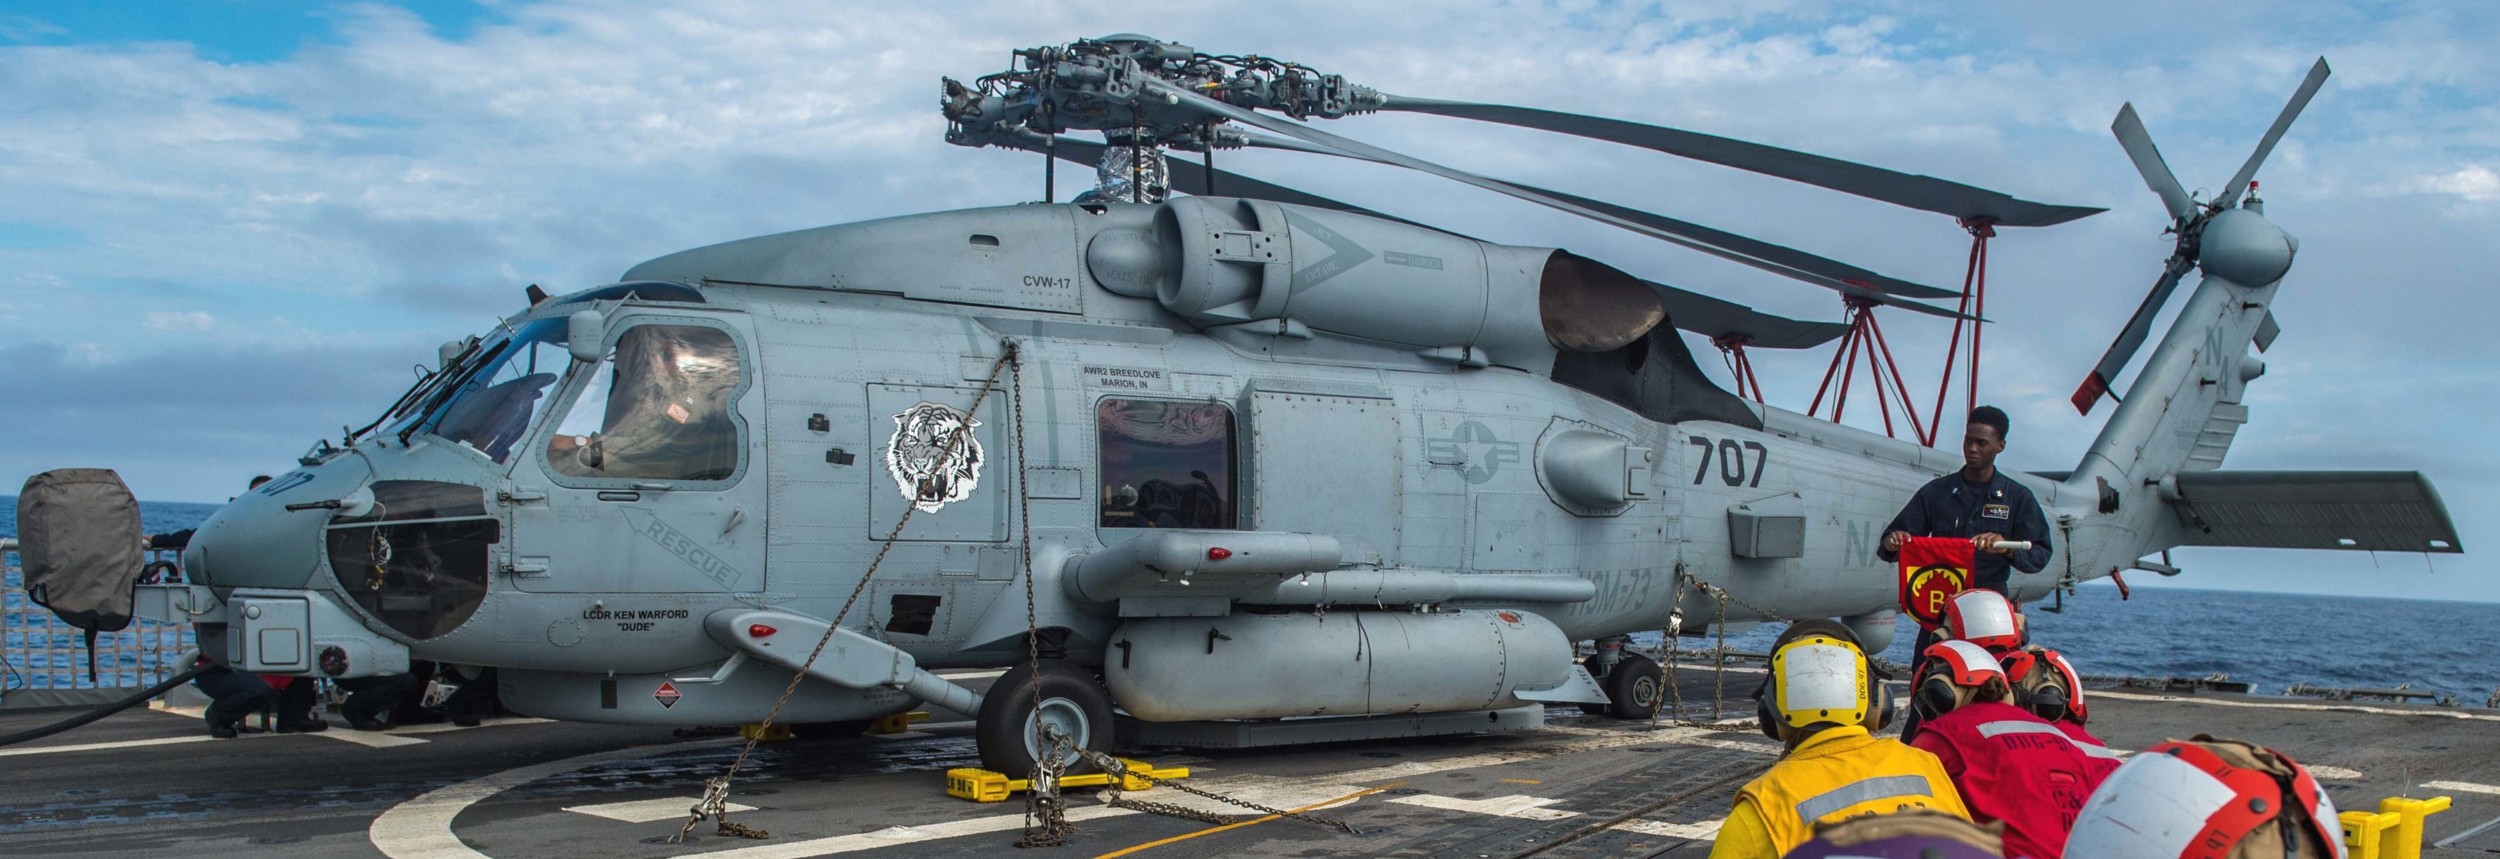 hsm-73 battlecats helicopter maritime strike squadron us navy mh-60r seahawk 2015 09 decoy flare